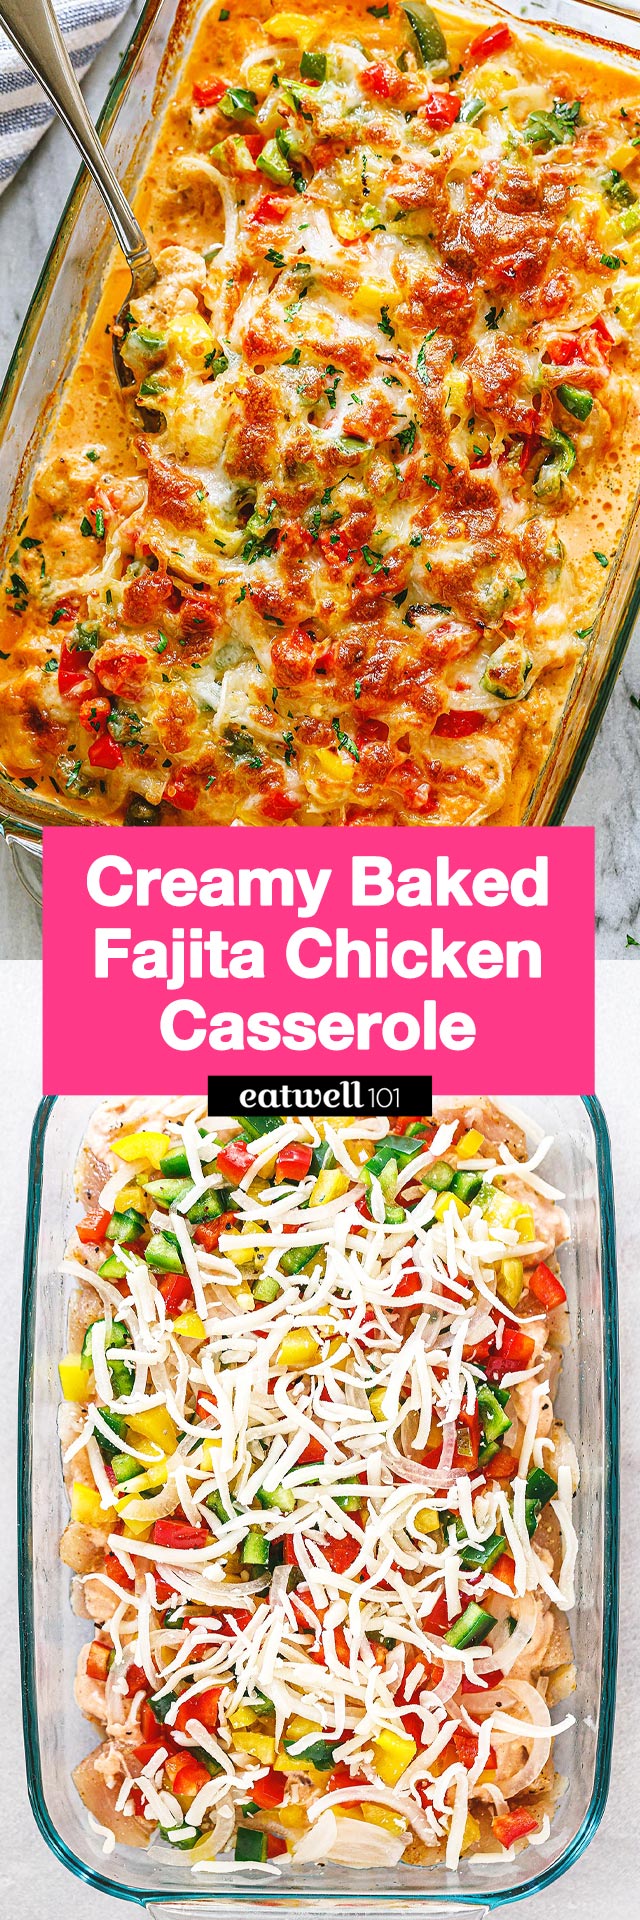 Creamy Baked Fajita Chicken Casserole - #chicken #casserole #recipe #eatwell101 - This creamy chicken fajita casserole is nourishing and packs a punch of flavor. We just know y’all are going to love it!